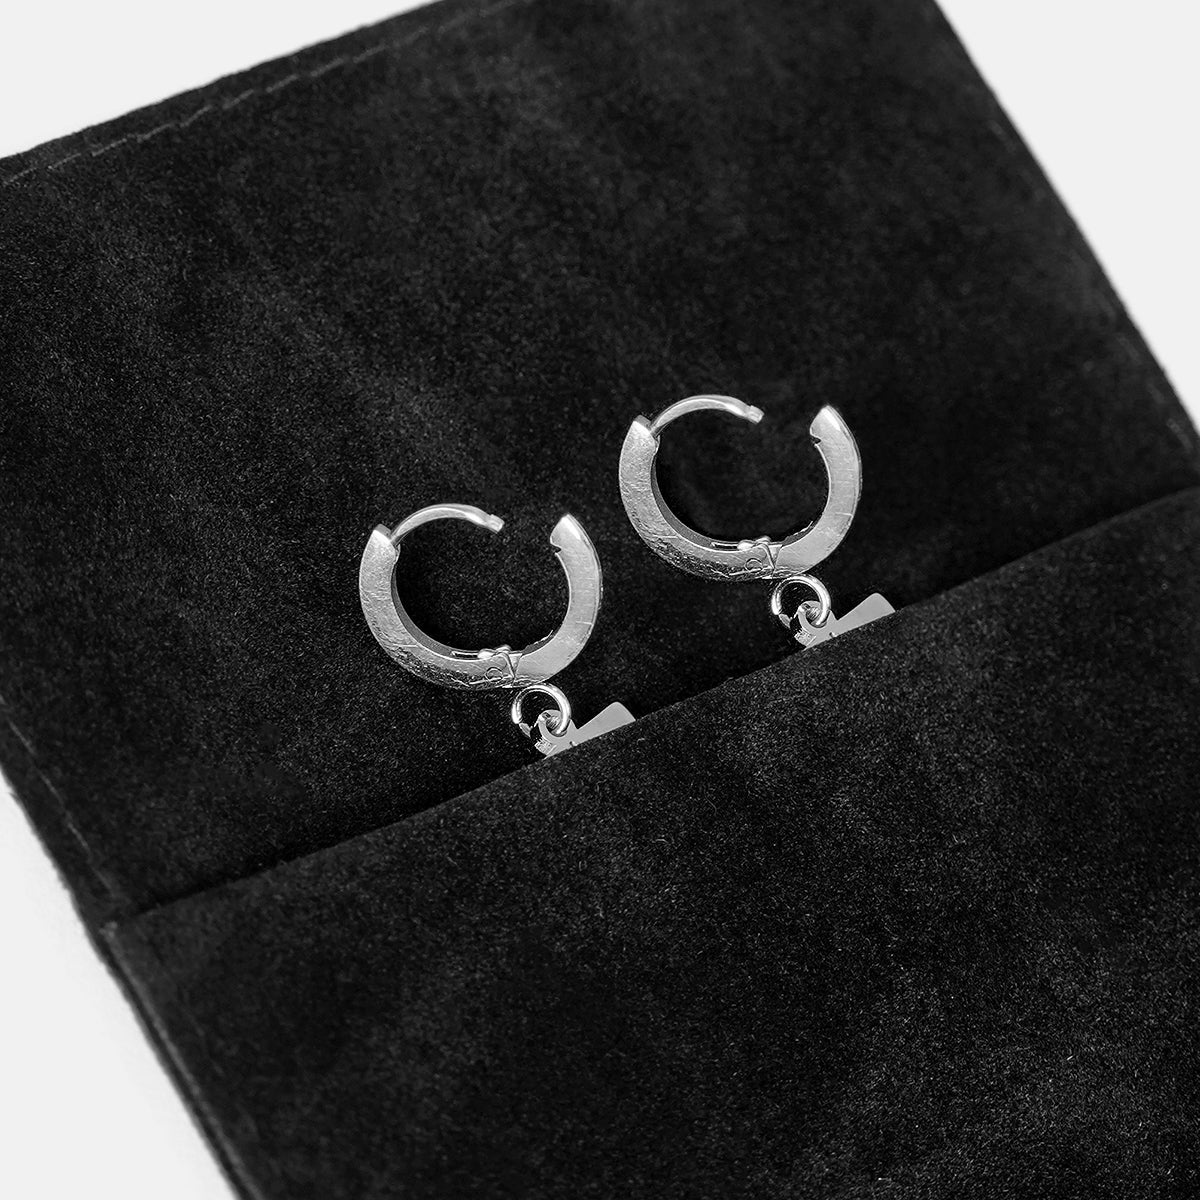 56 Number Earring - Stainless Steel